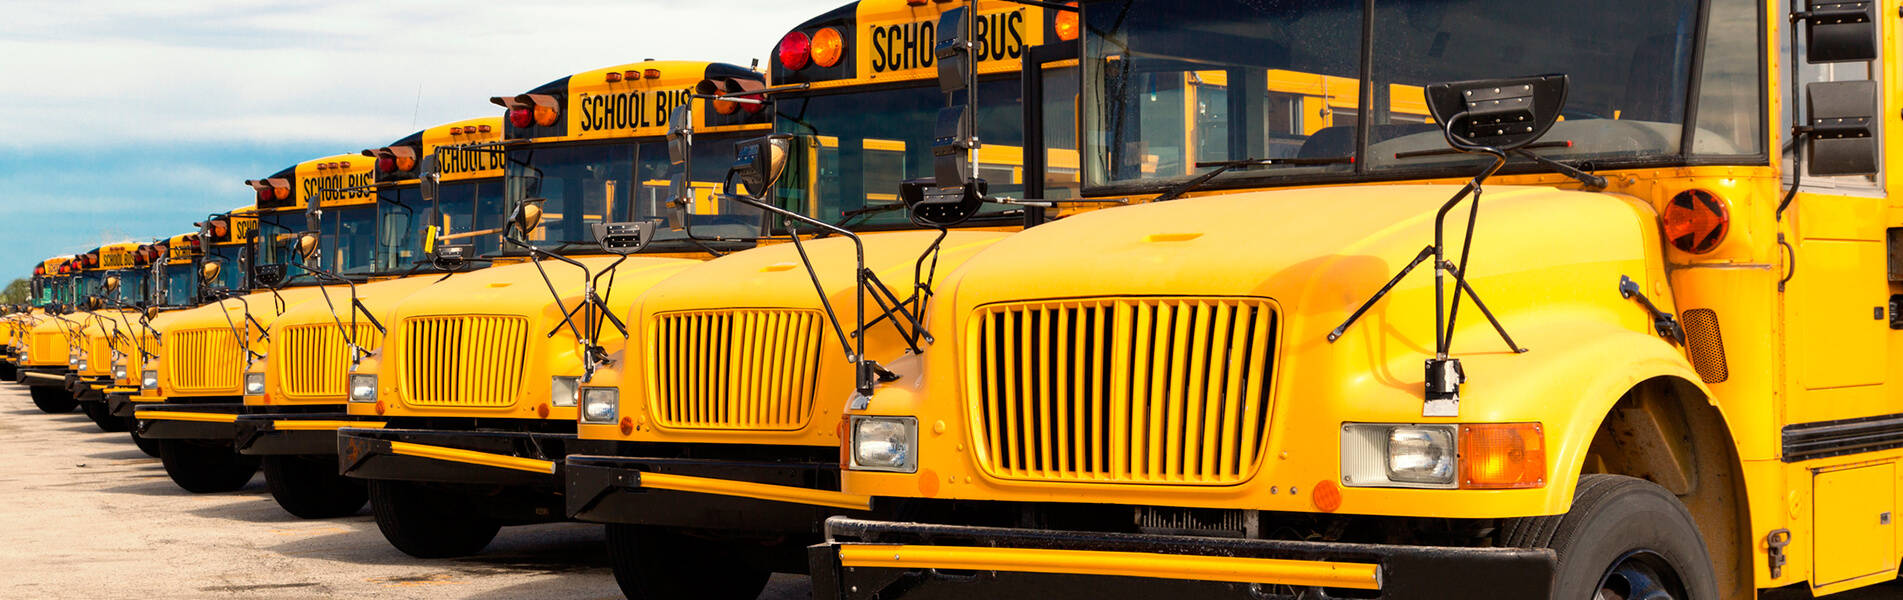 Make an impact on a child's life: Become a bus driver.